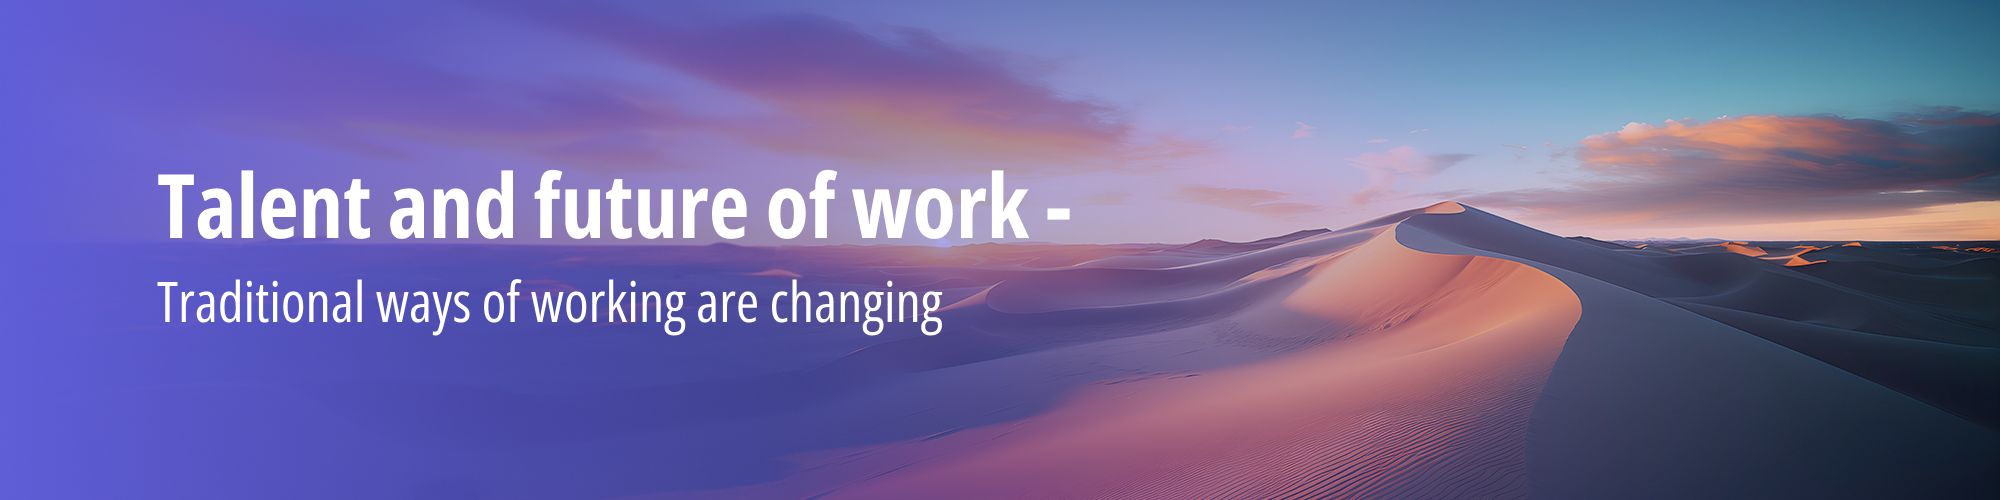 Talent and future of work traditional ways of working are changing